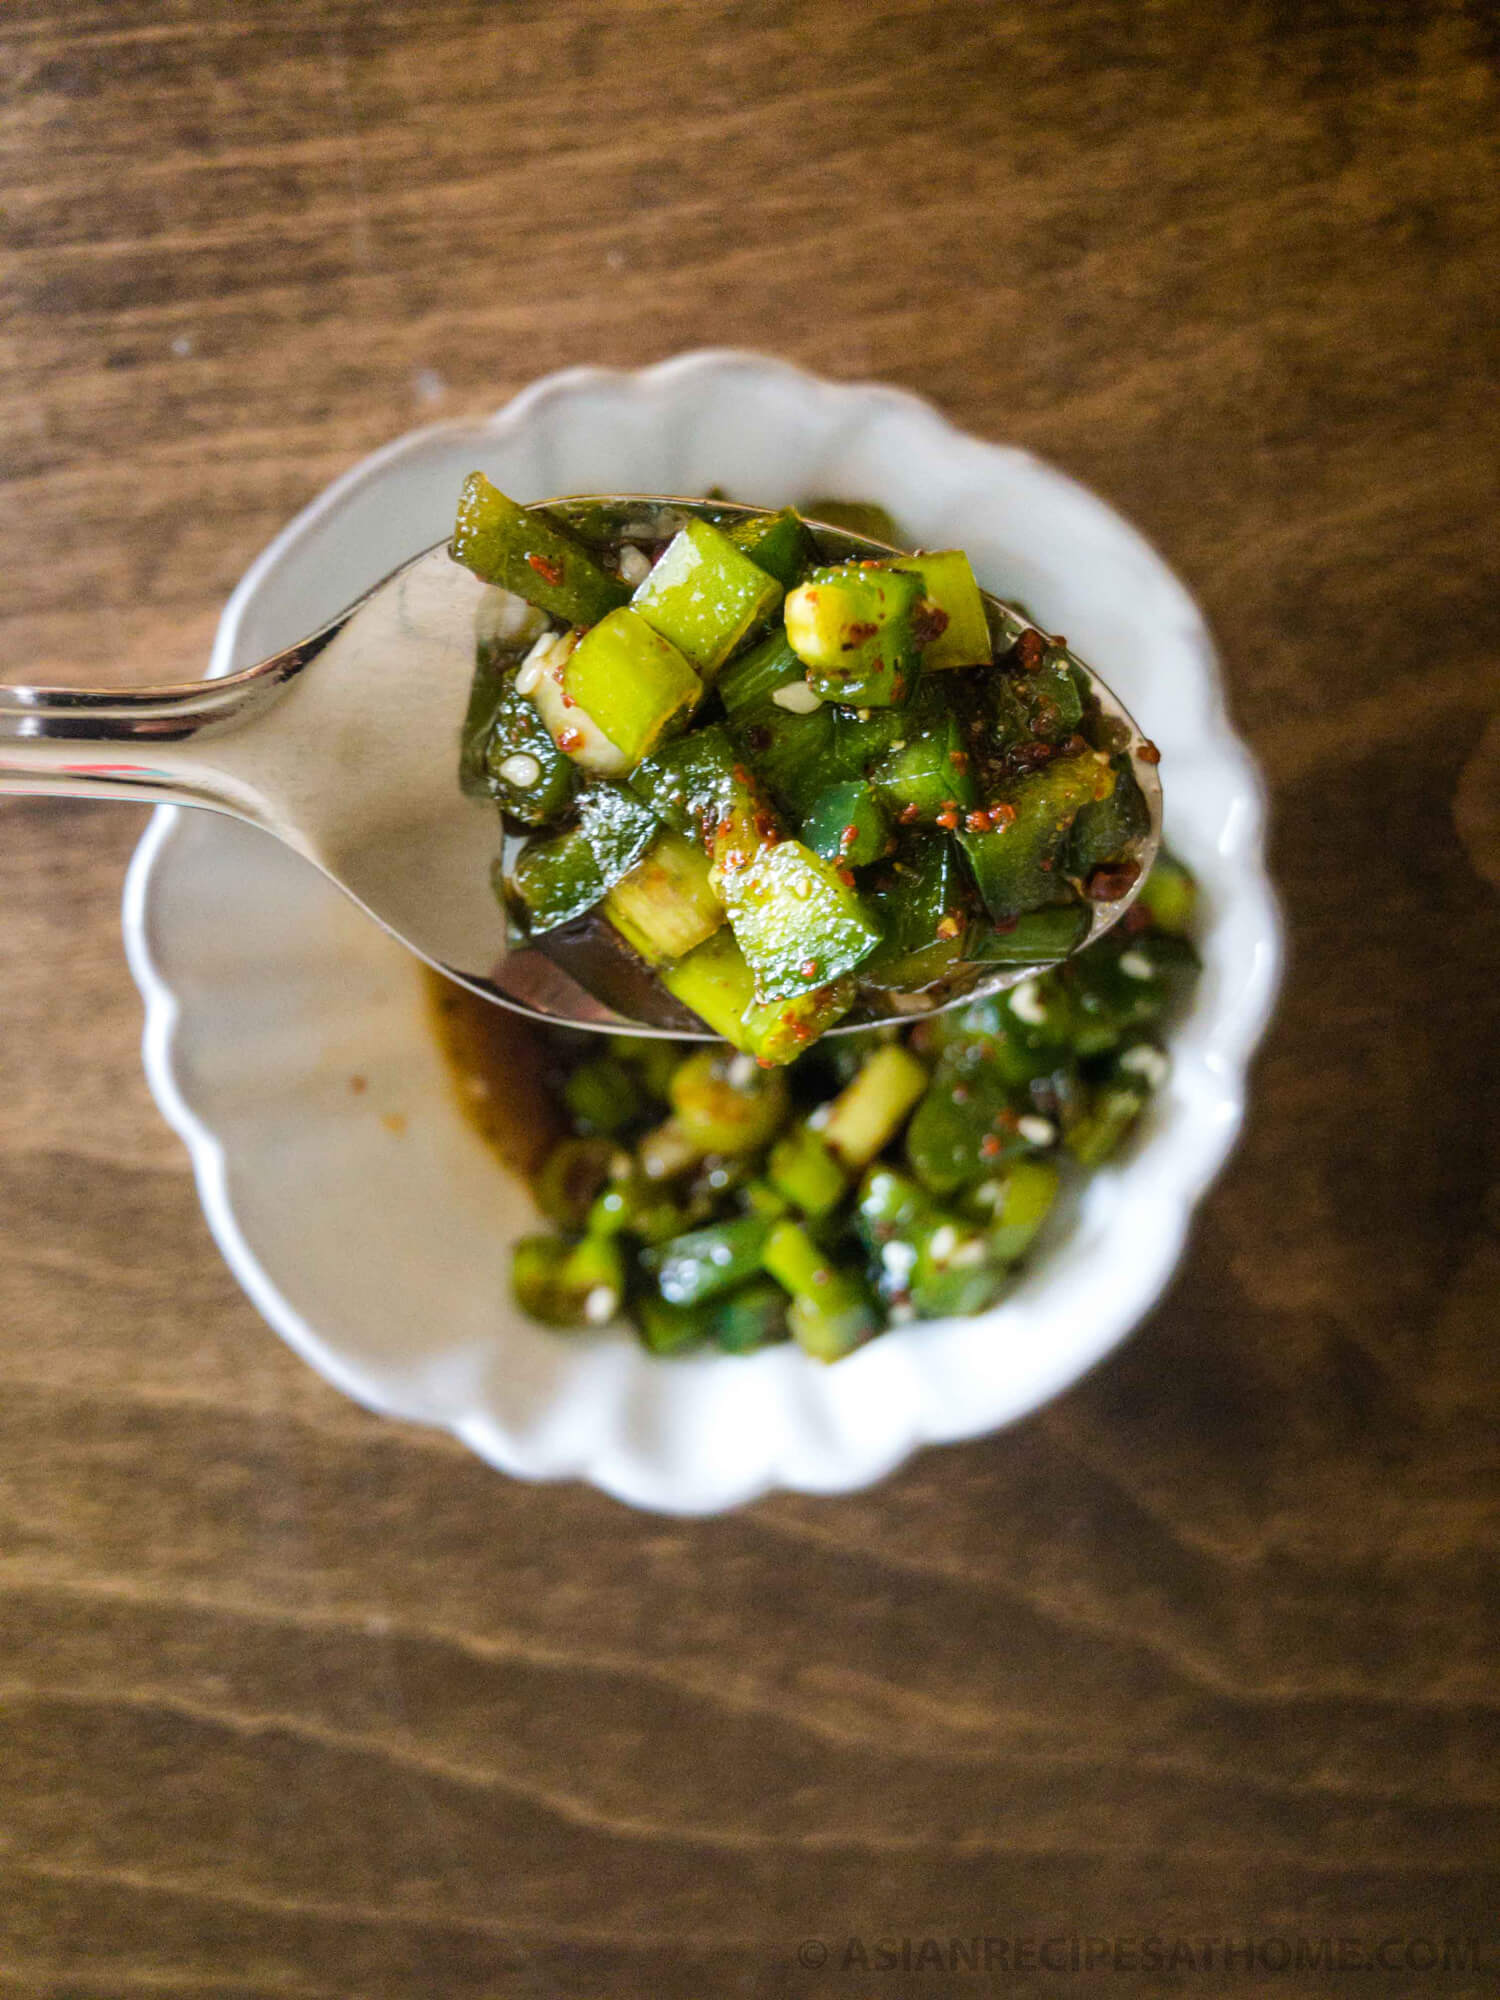 Spoonful of Asian-style Jalapeno and Green Onion Sauce.